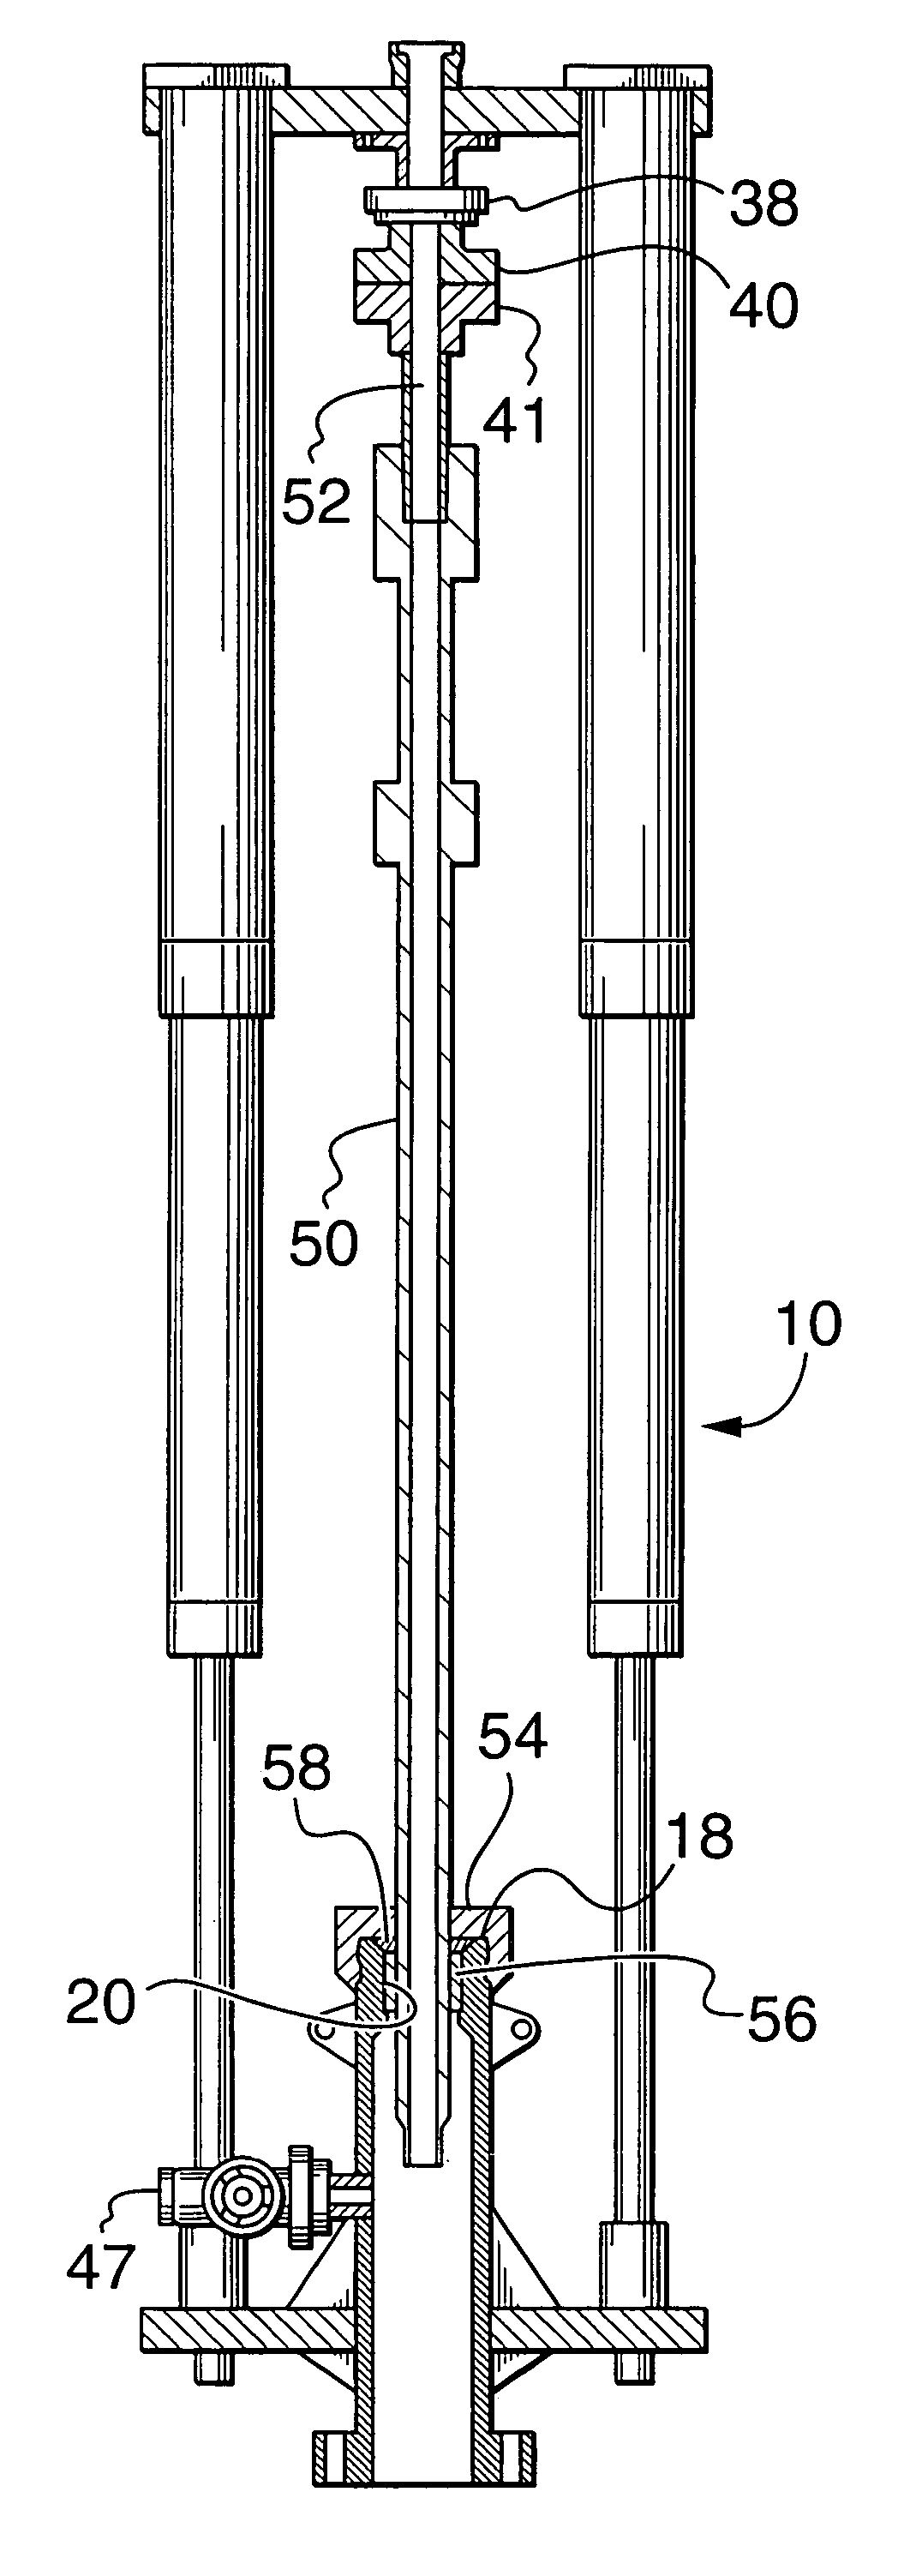 Apparatus for controlling a tool having a mandrel that must be stroked into or out of a well